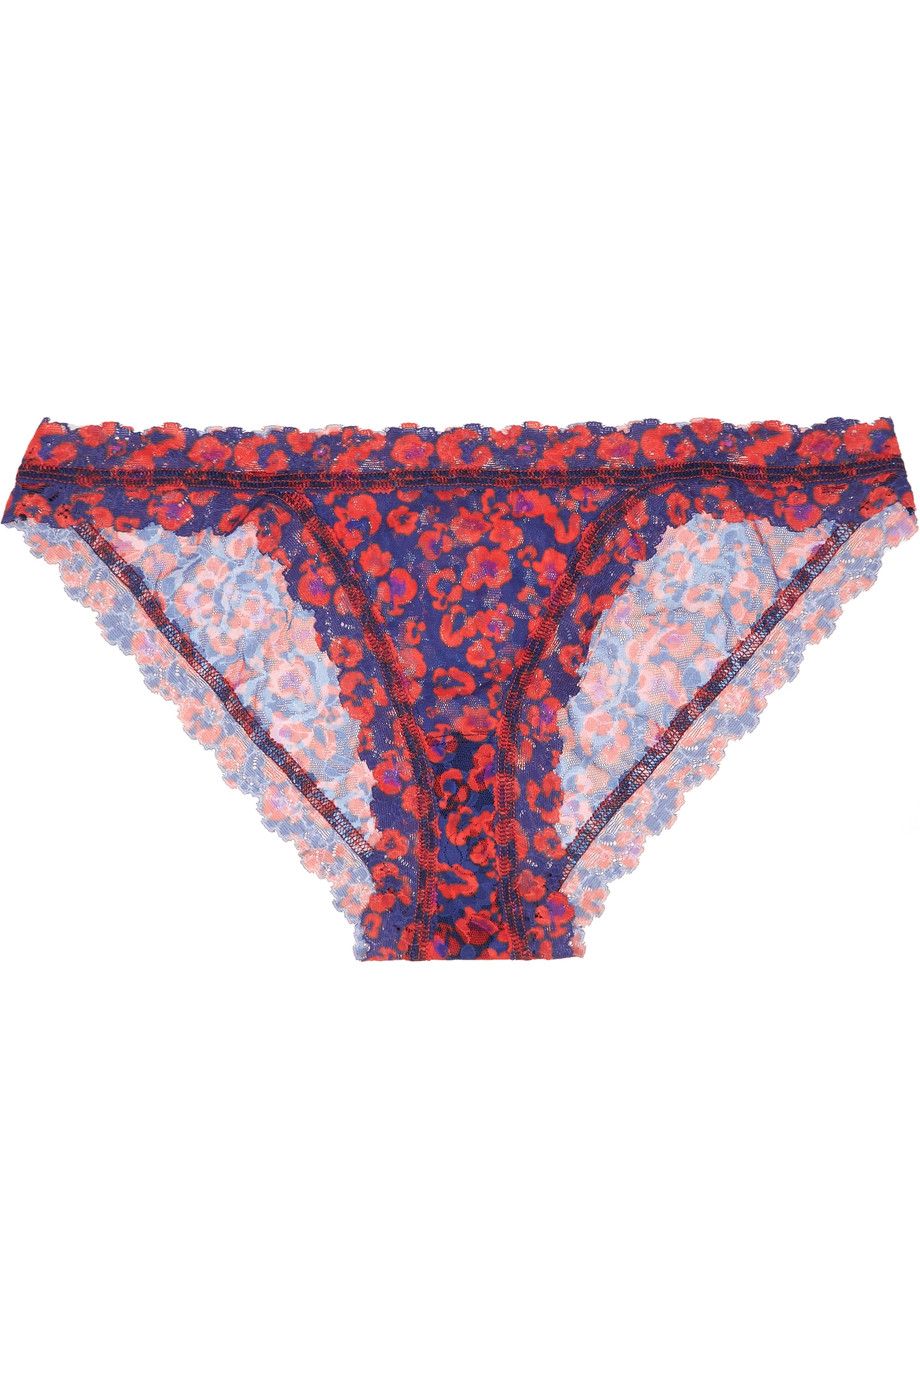 White, Red, Pattern, Carmine, Maroon, Rectangle, Undergarment, Symmetry, Briefs, Coquelicot, 